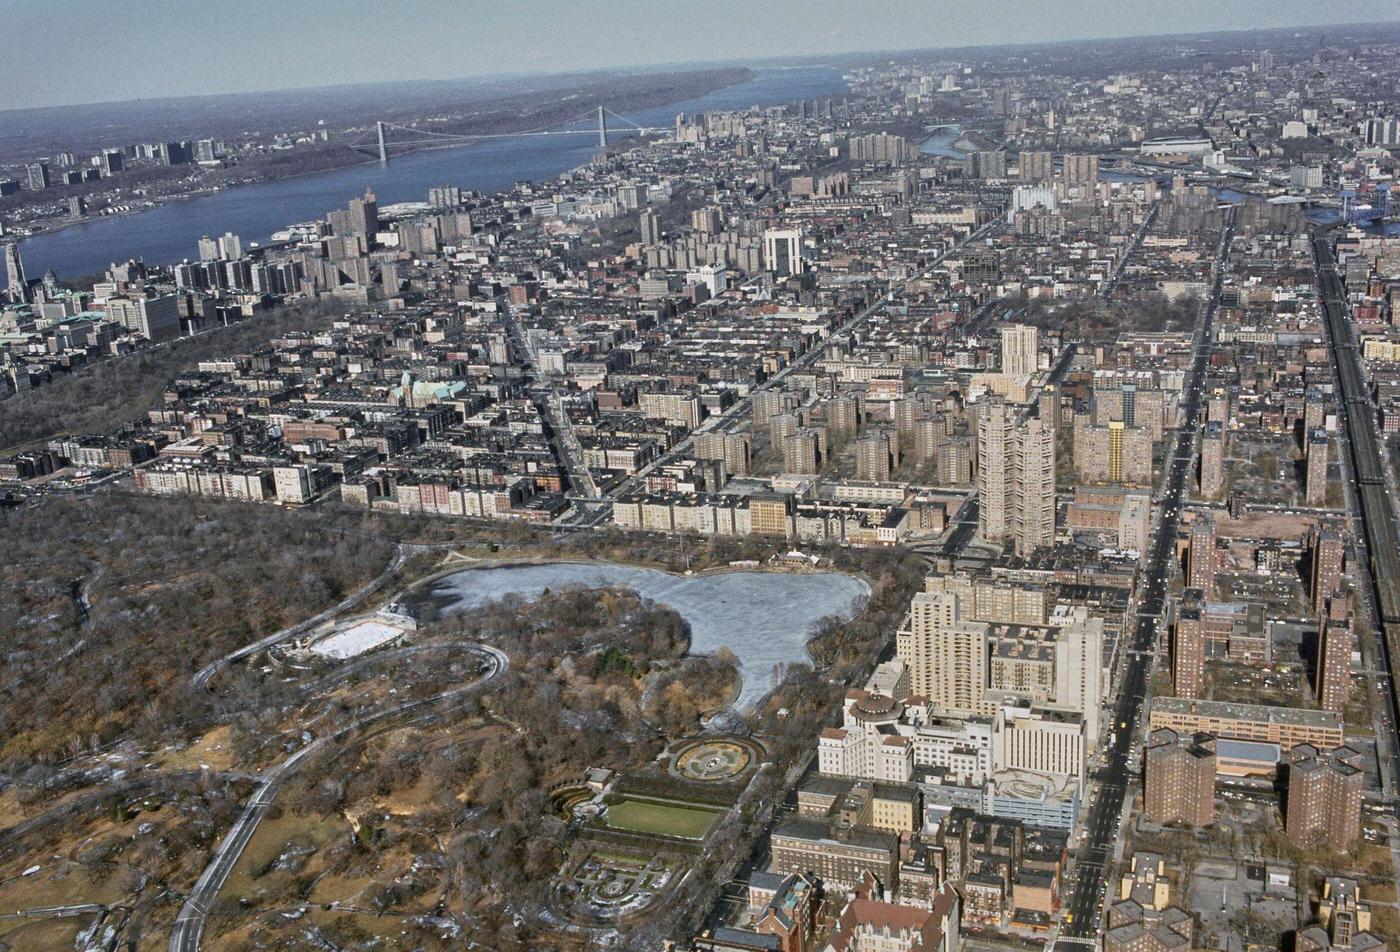 Aerial View Of Harlem Meer Lake, North Woods In Central Park, And Harlem Neighborhood With Hudson River And George Washington Bridge, Upper Manhattan, 1985